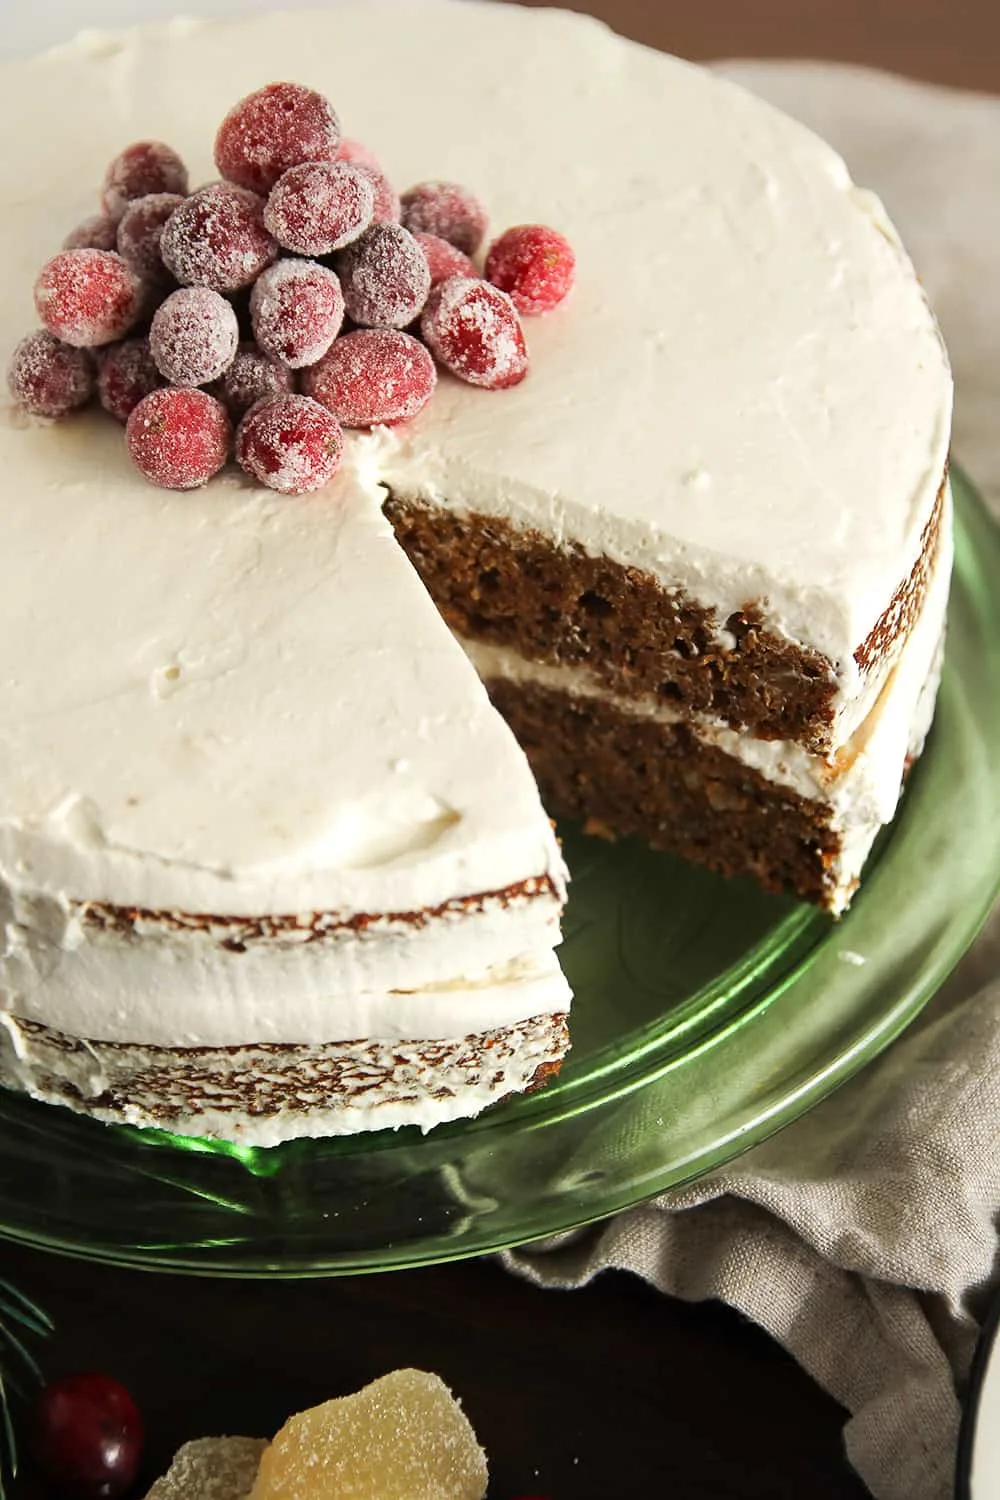 Gingerbread Layer Cake is two layers of gingerbread cake with whipped cream frosting and sugared cranberries